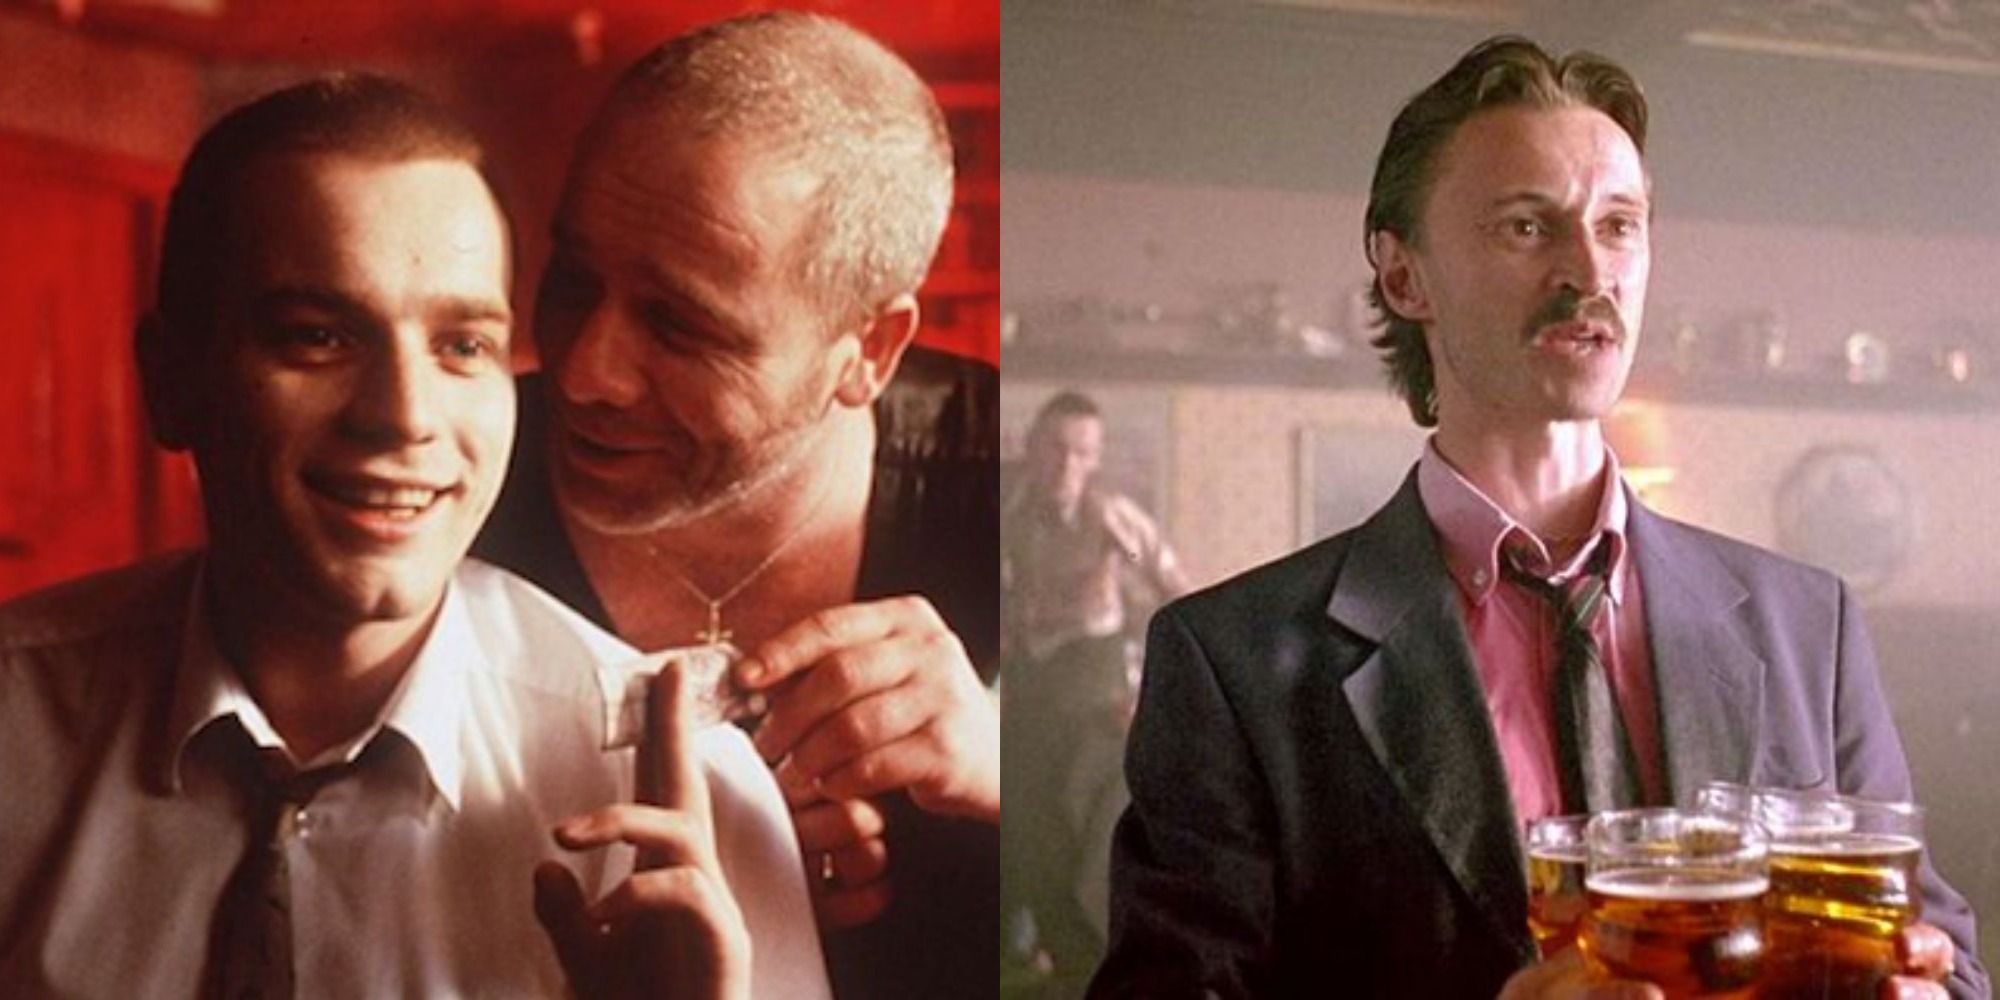 Two side by side images from Trainspotting. L: Renton and Mother Superior and right, Begbie with pints.